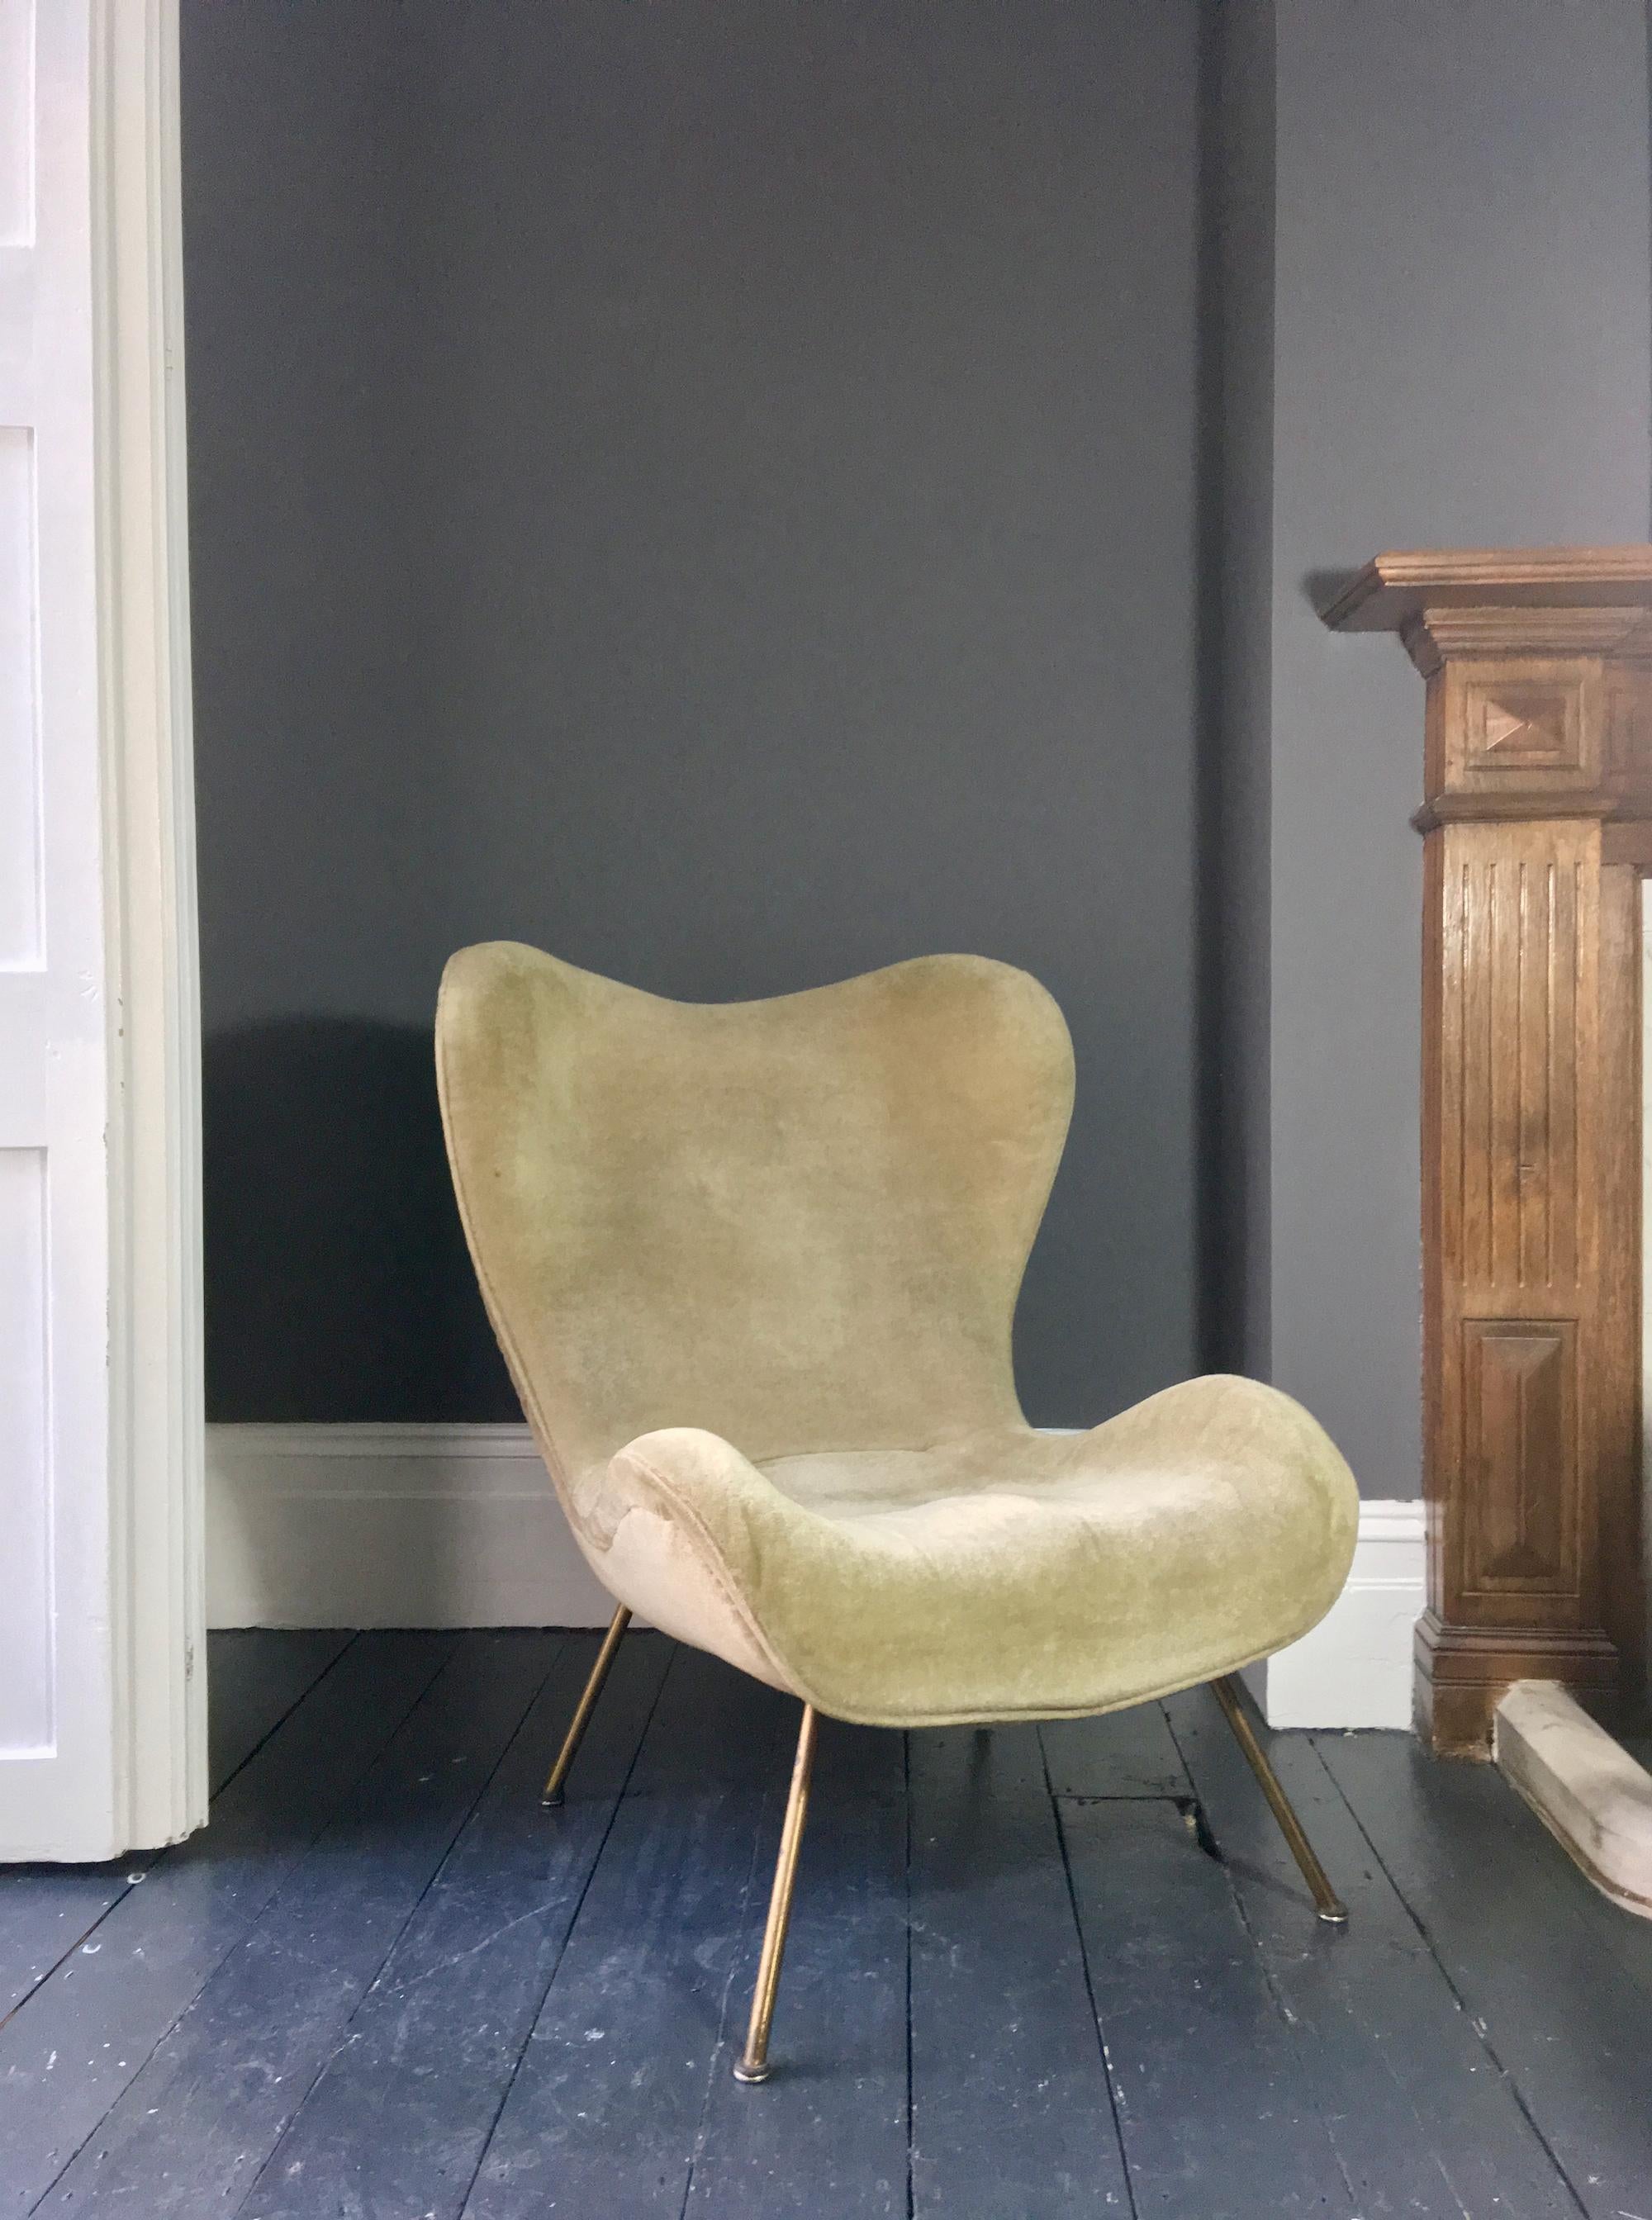 An all-original example of the Madame chair by Fritz Neth for Correcta, Germany, 1950s.

Wonderful organic sculptural design, which is both stylish and extremely comfortable. These chairs do not often come to market, especially in nice vintage